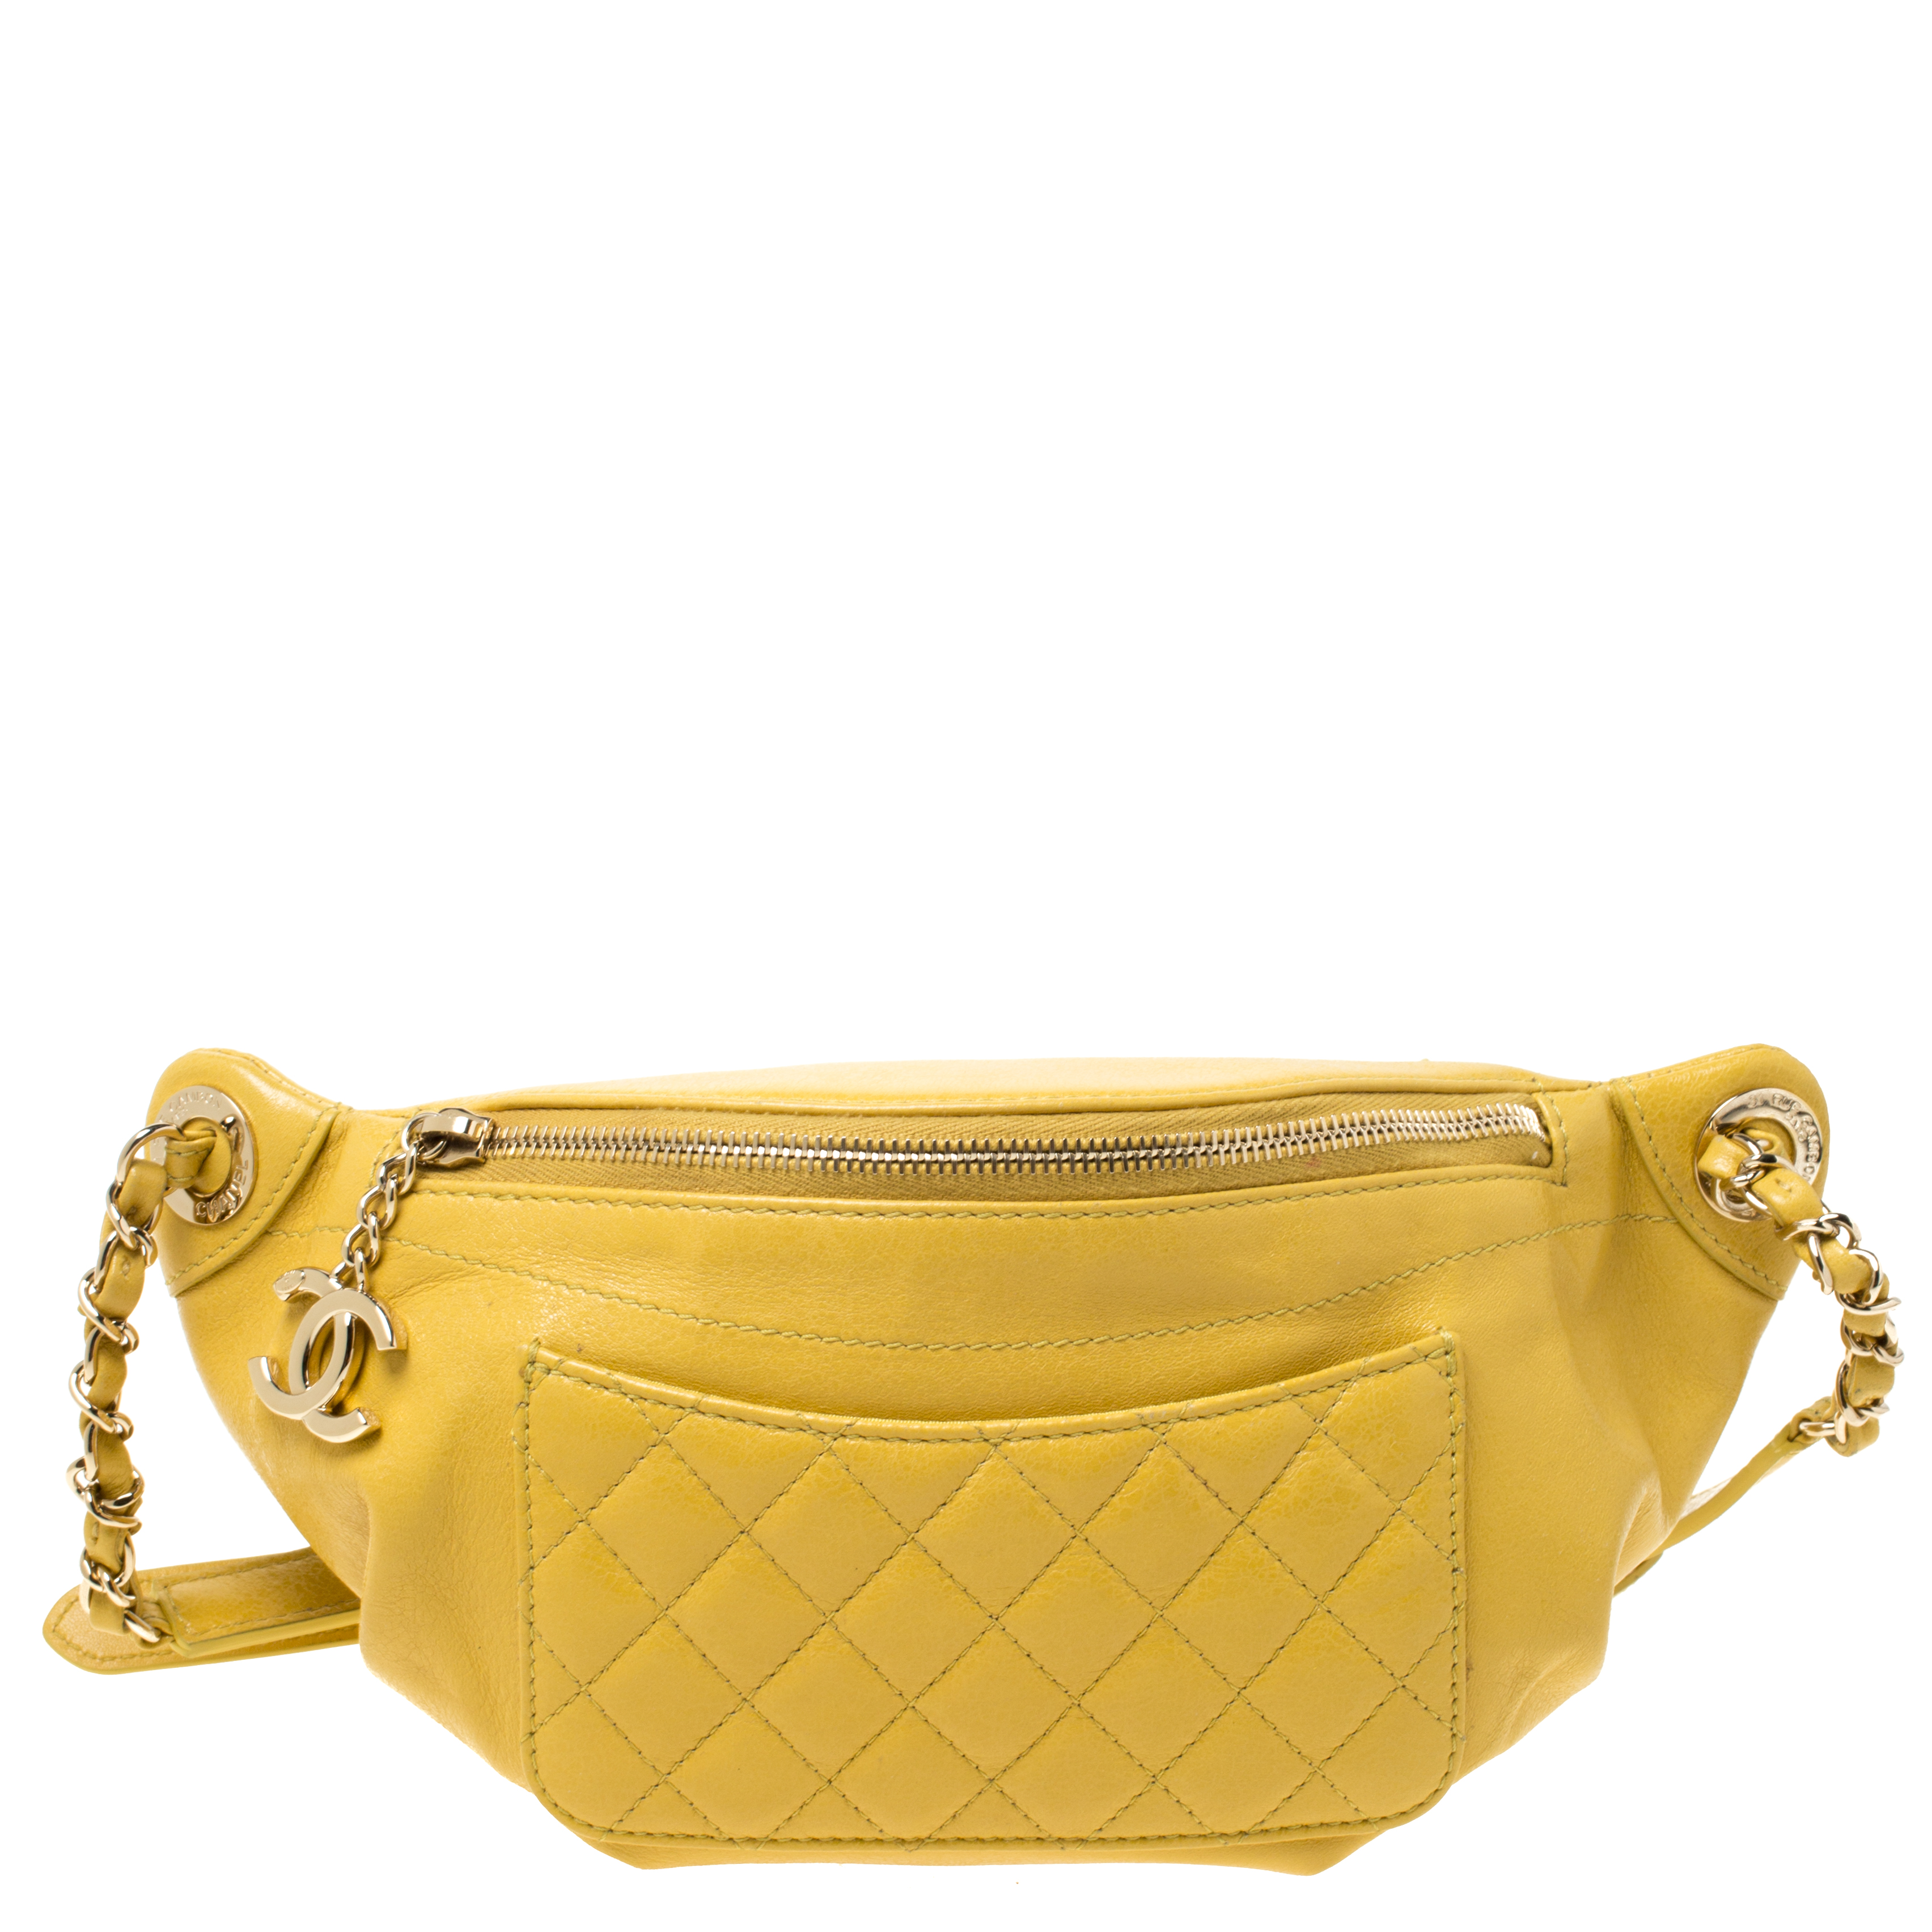 Chanel Yellow Quilted Leather Fanny Pack Waistbelt Bag